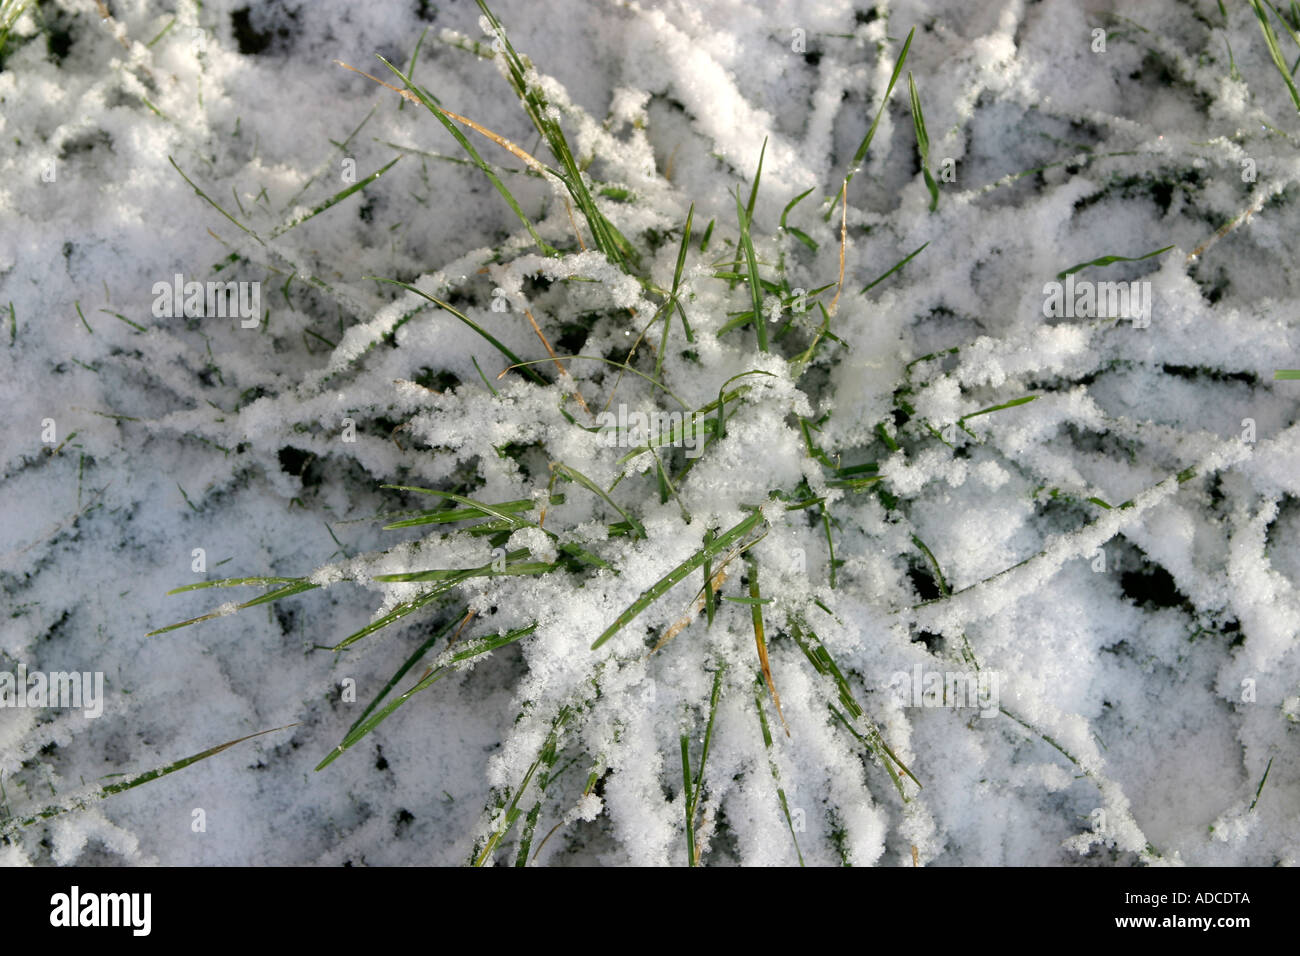 landscape shot of freshly fallen snow onto blades of grass showing a circular pattern and shape Stock Photo